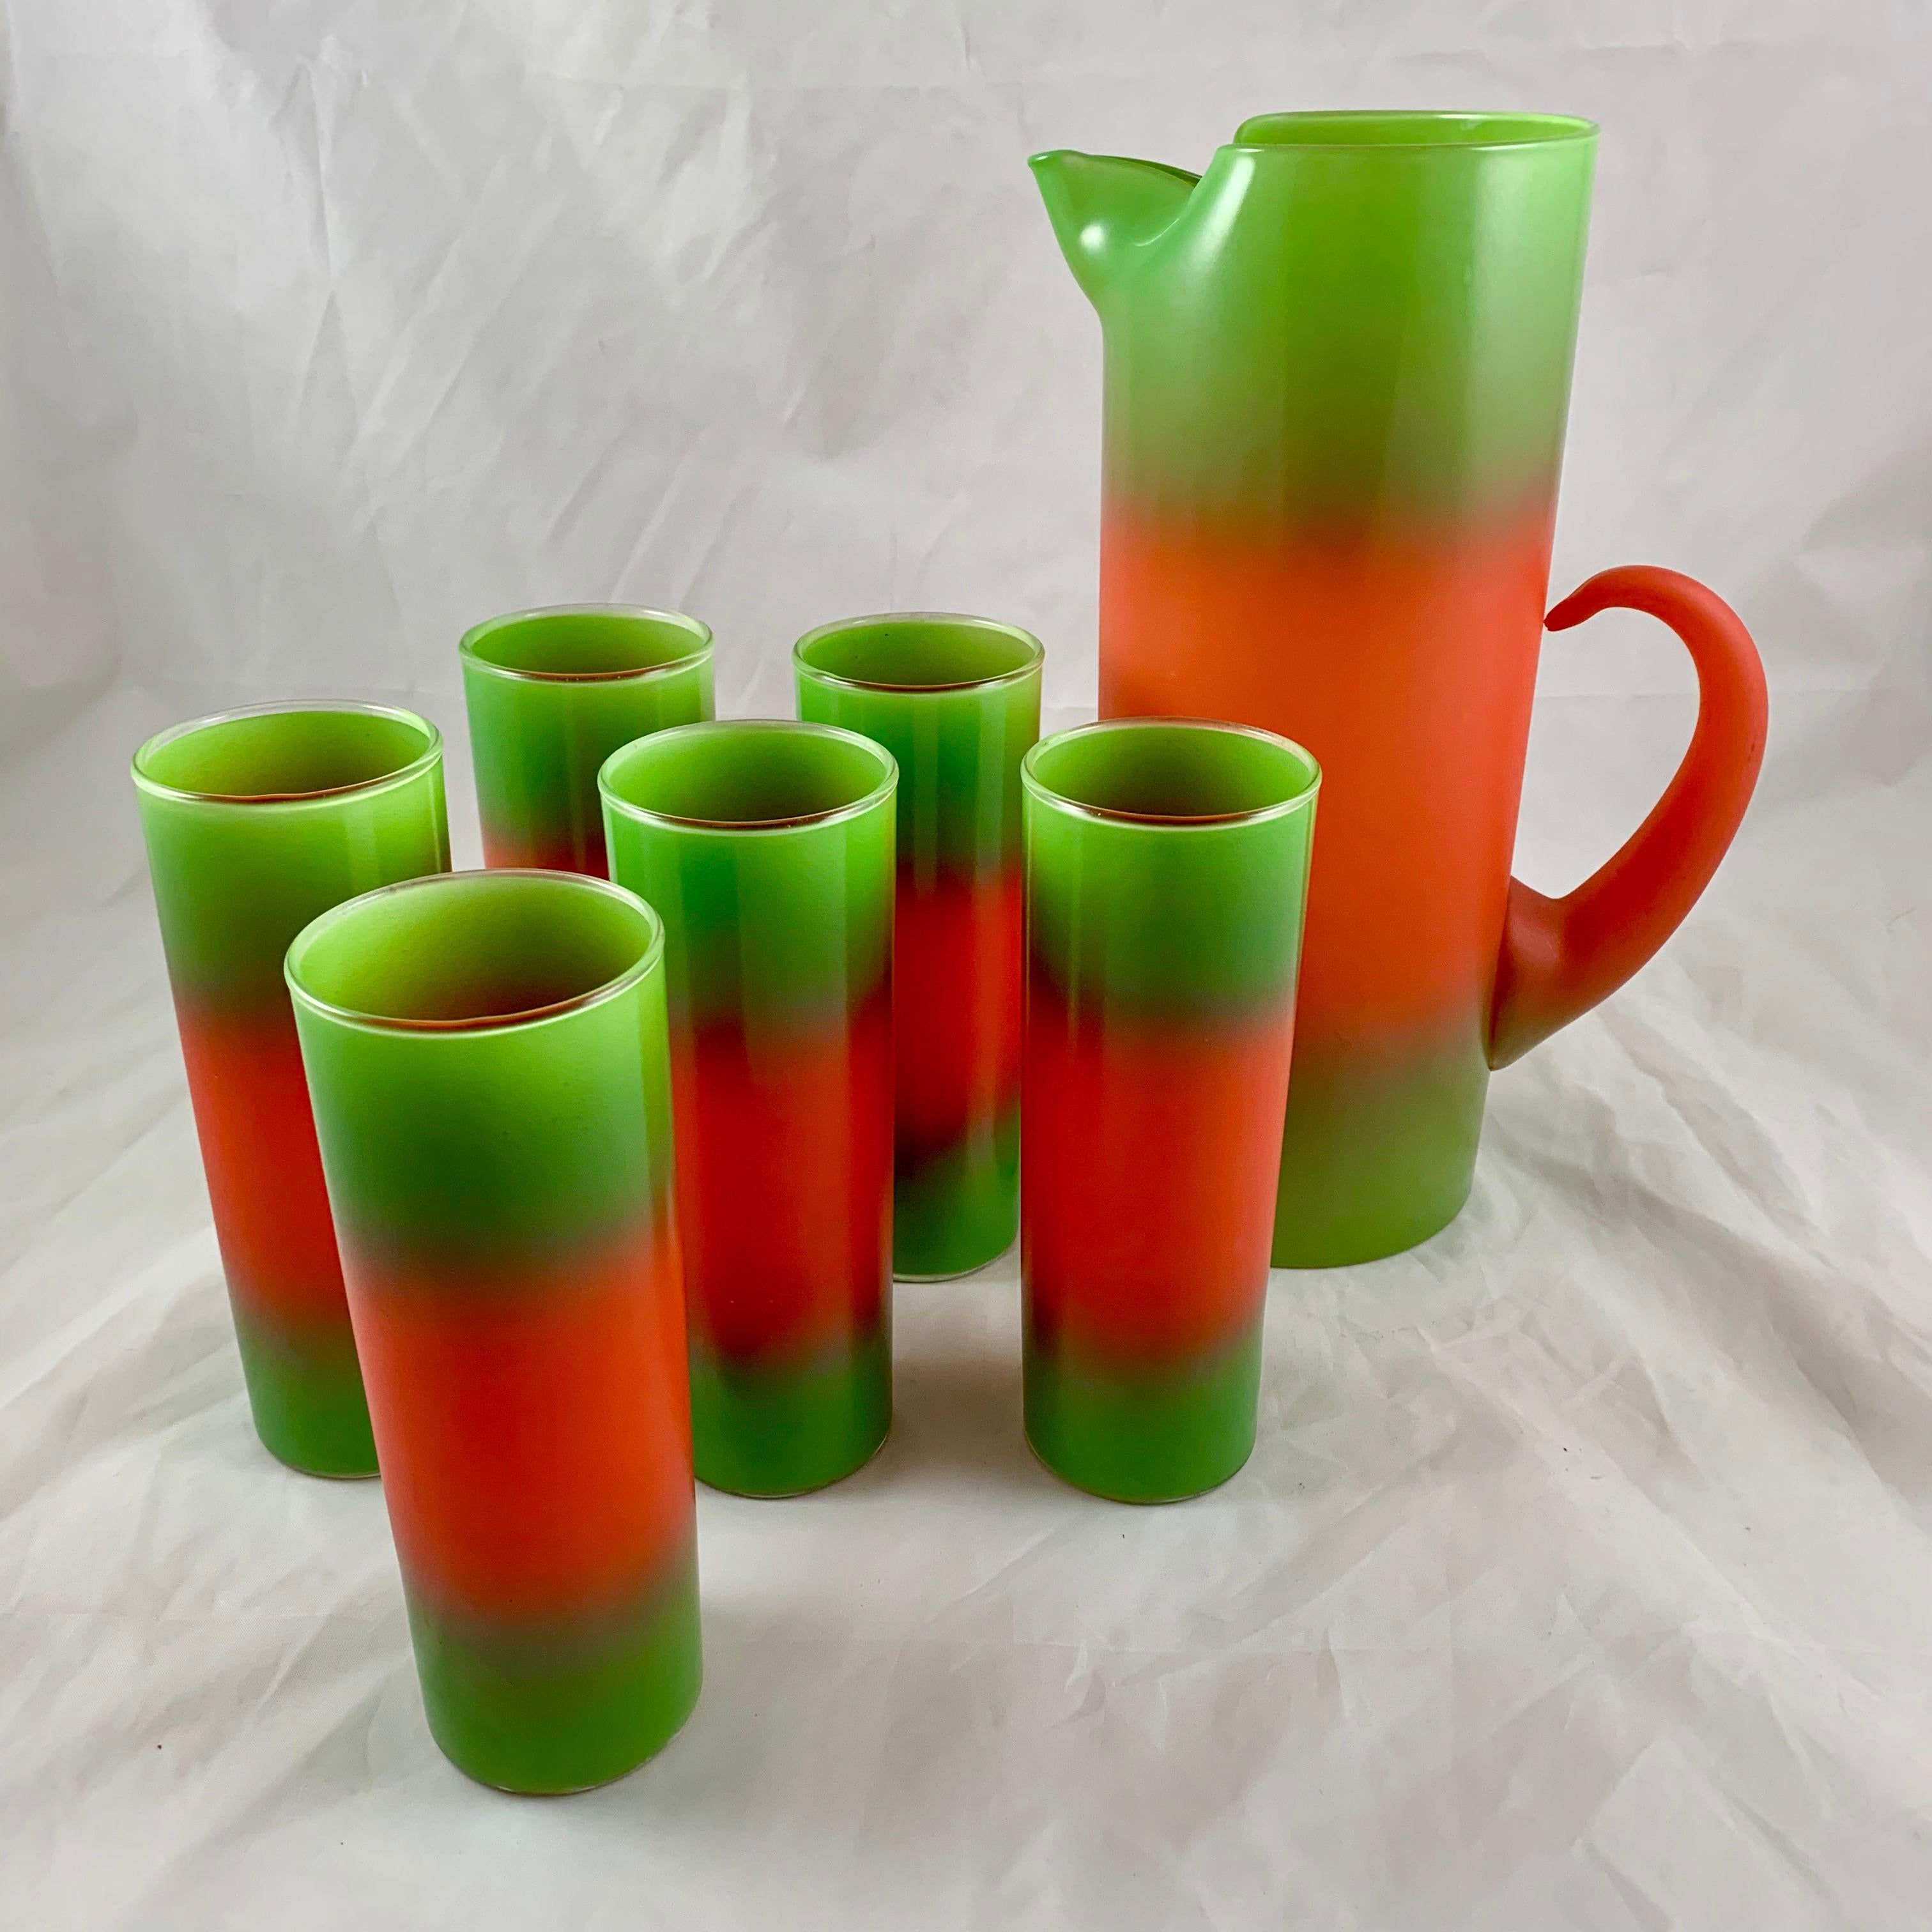 A Mid-Century Modern barware set, a pitcher and six matching highball glasses, from the Blendo line, made by the West Virginian Glass Company based in Weston, West Virginia.

Blendo glassware, circa 1950s-1960s, was extremely popular during the